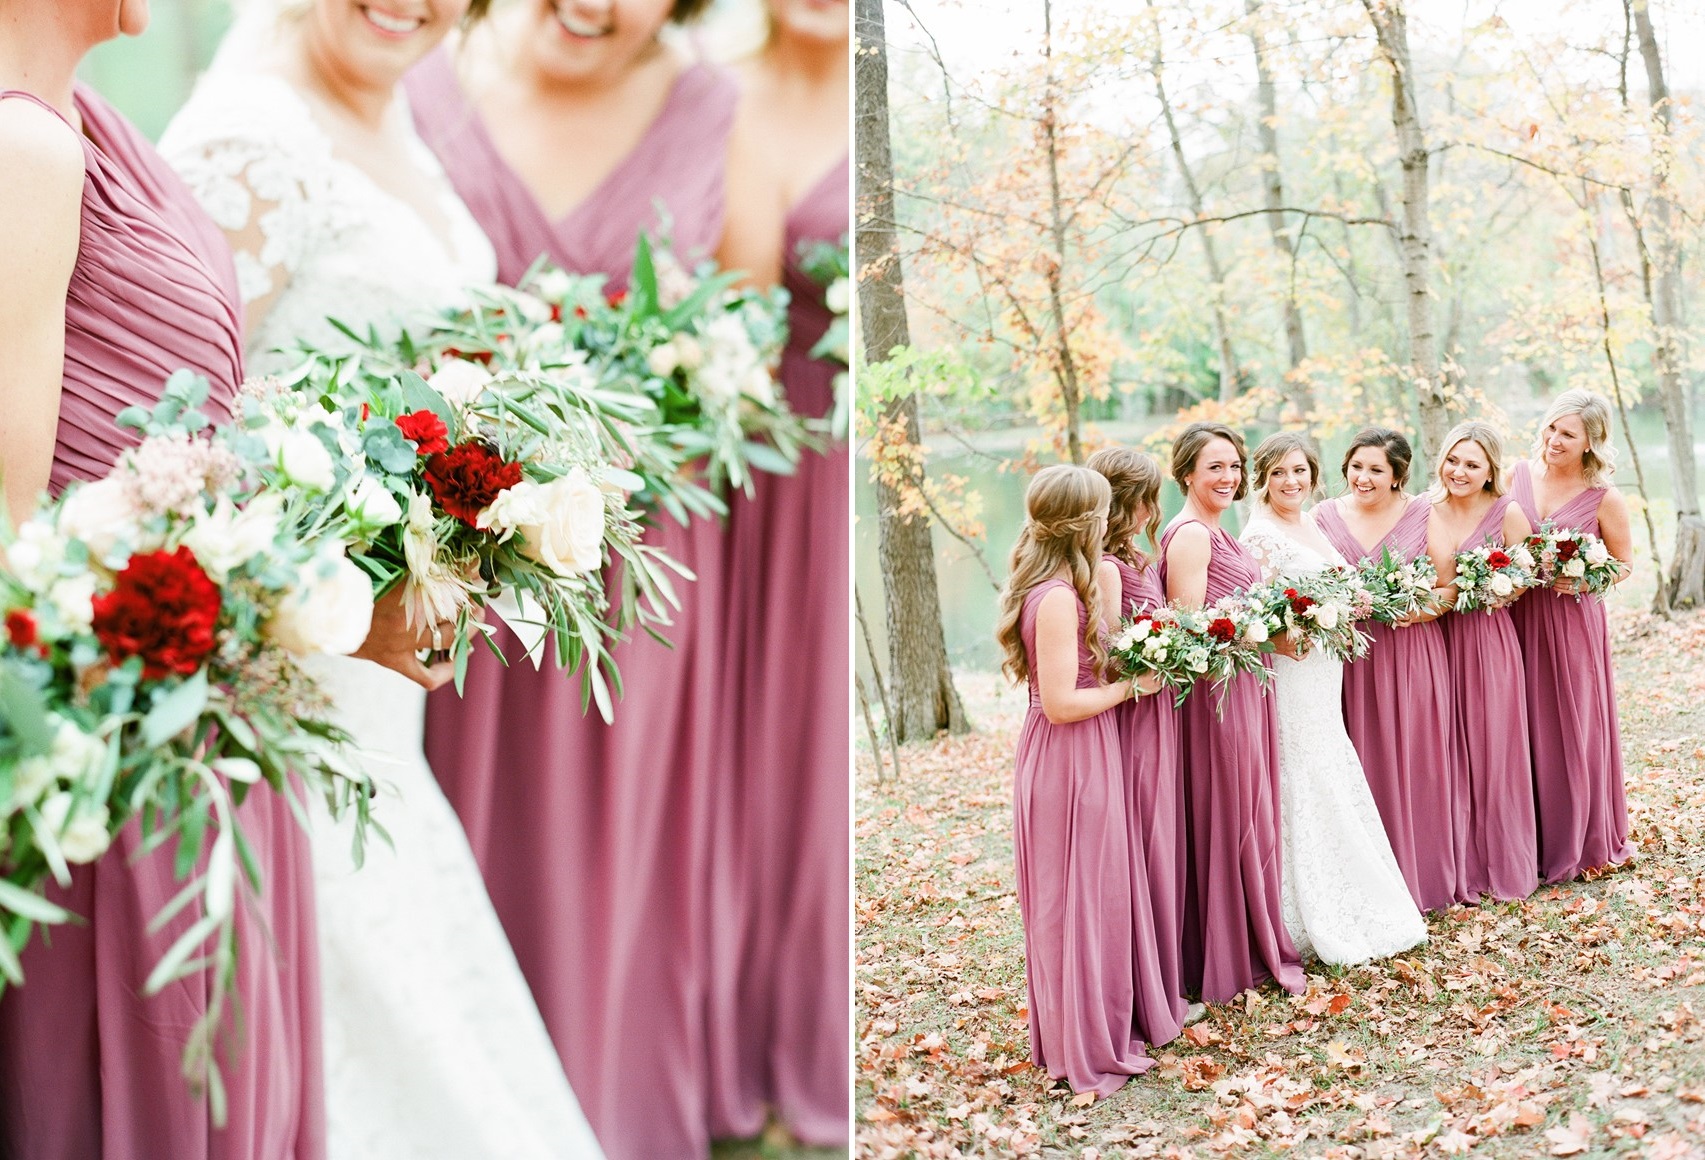 Pink bridesmaids and red bouquets